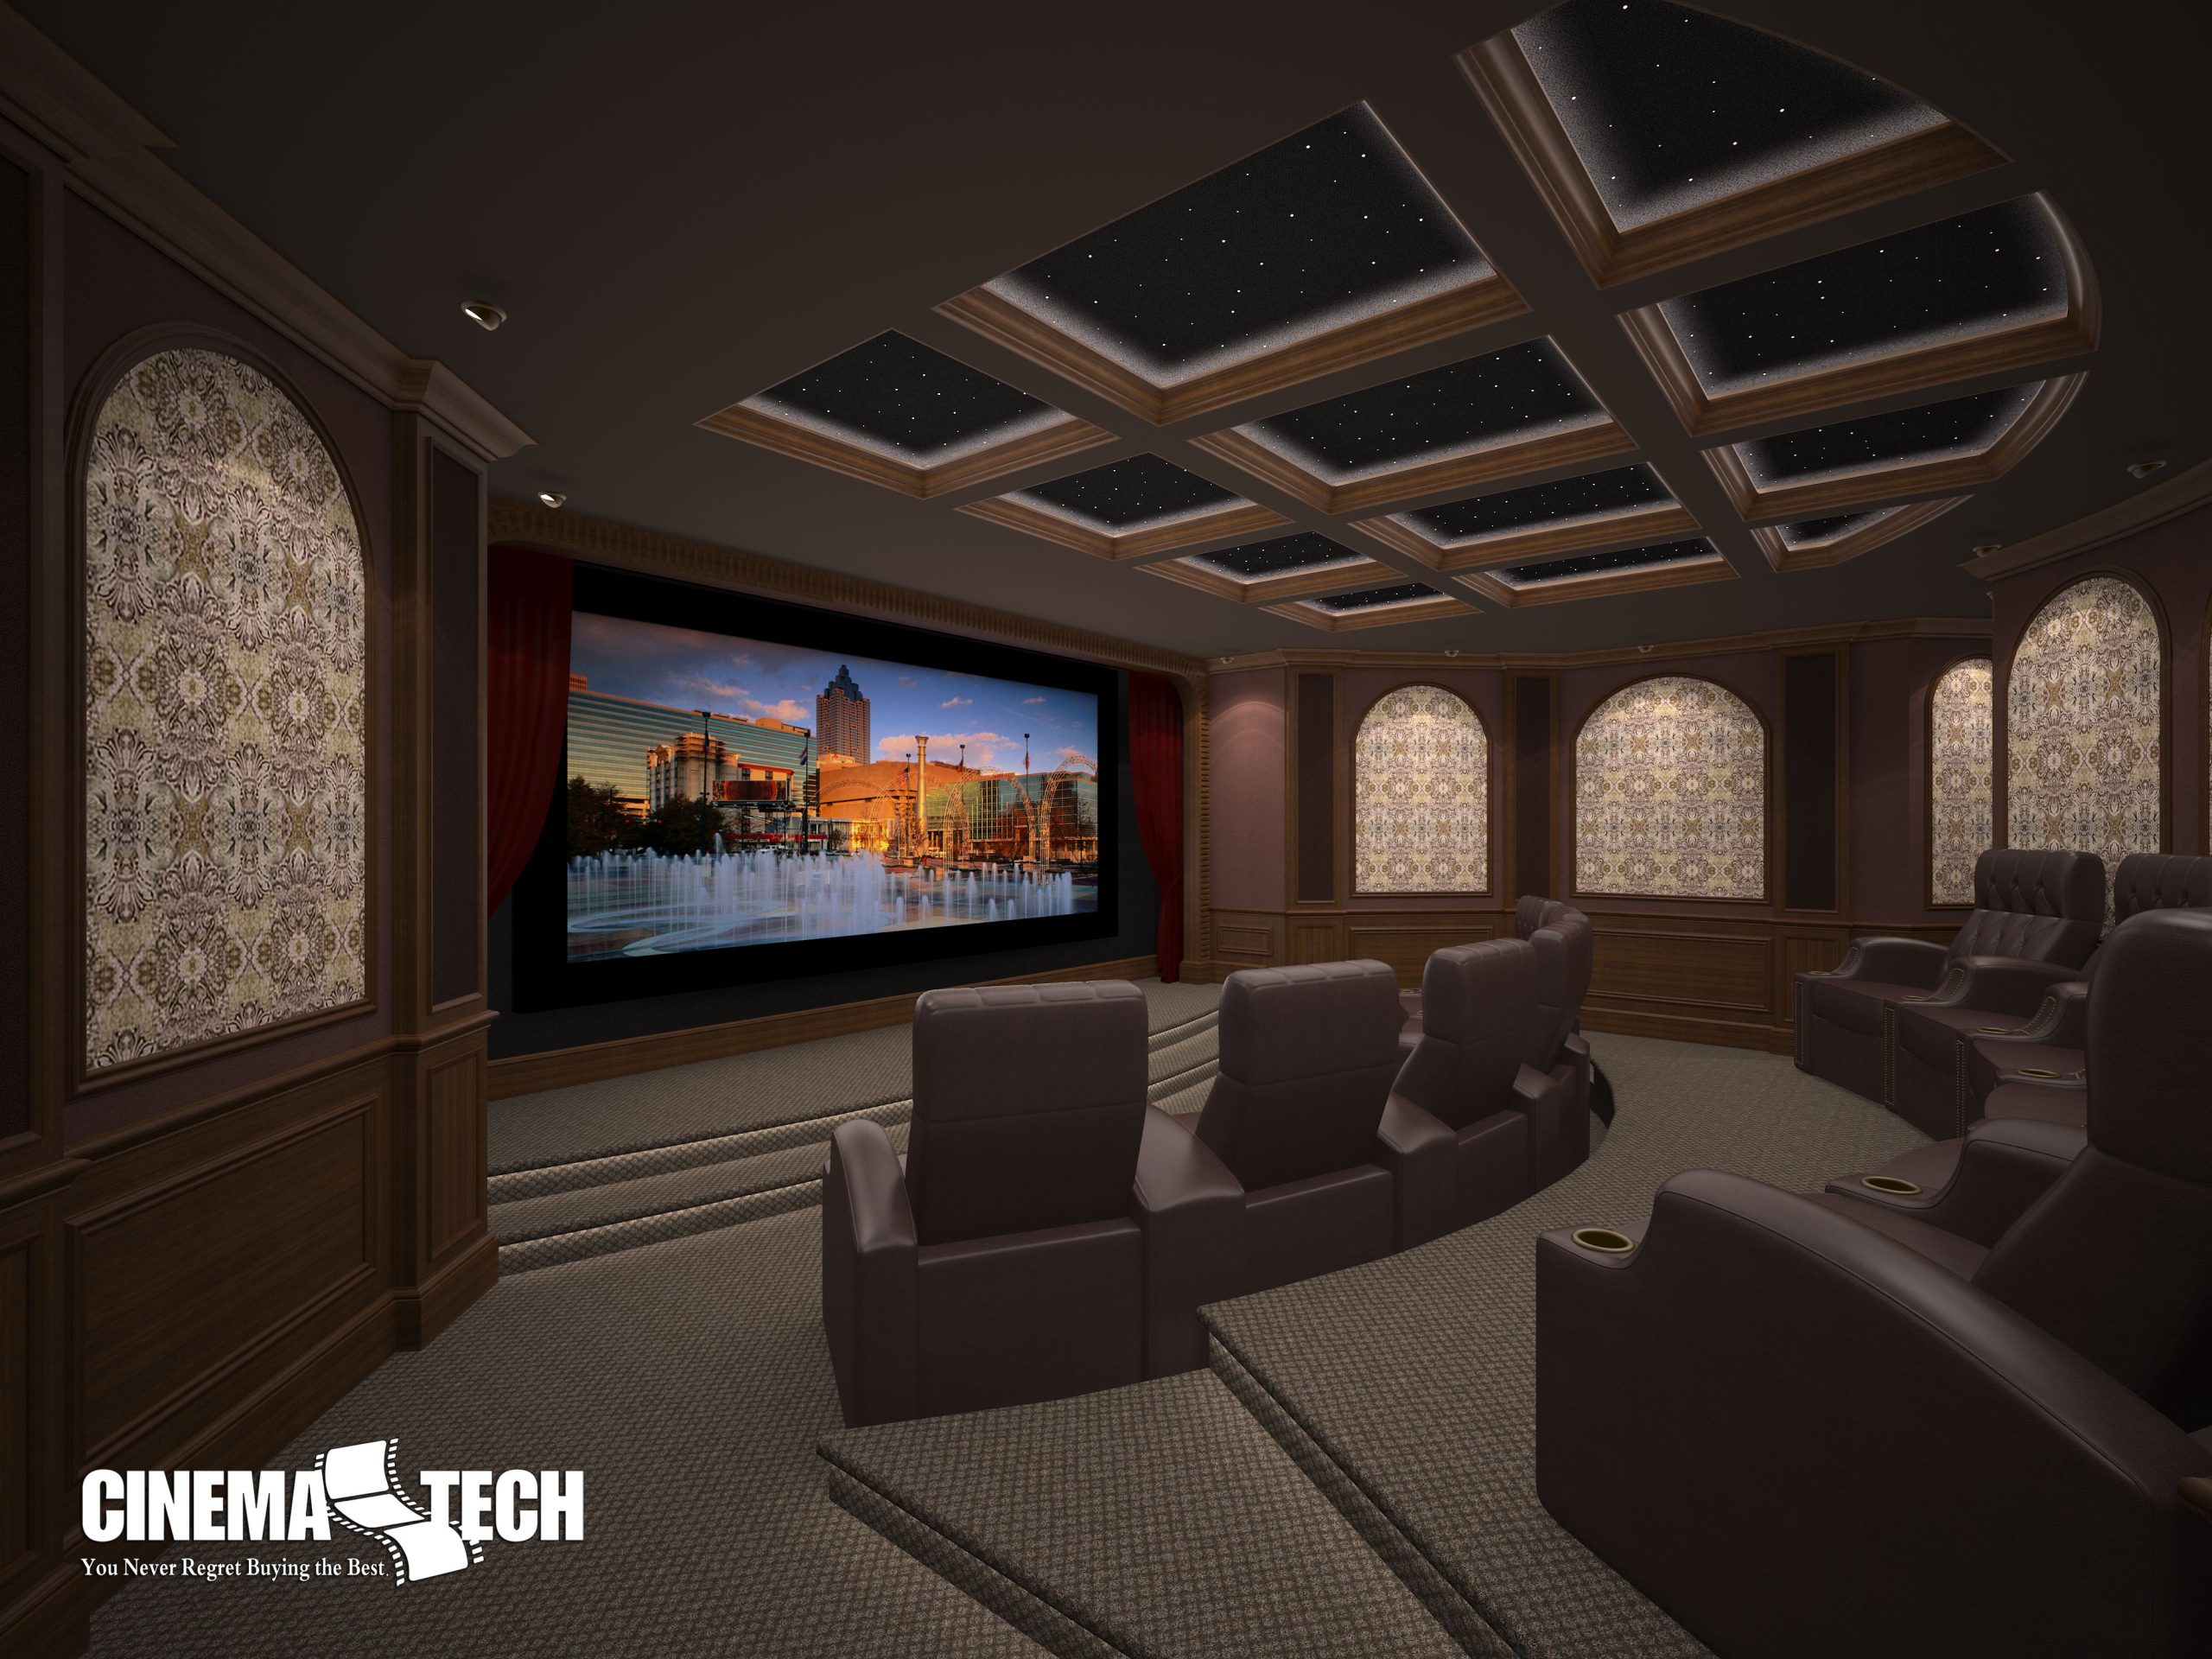 Does a Home Theater Add Value? Diamond J Audio, The Woodlands, TX